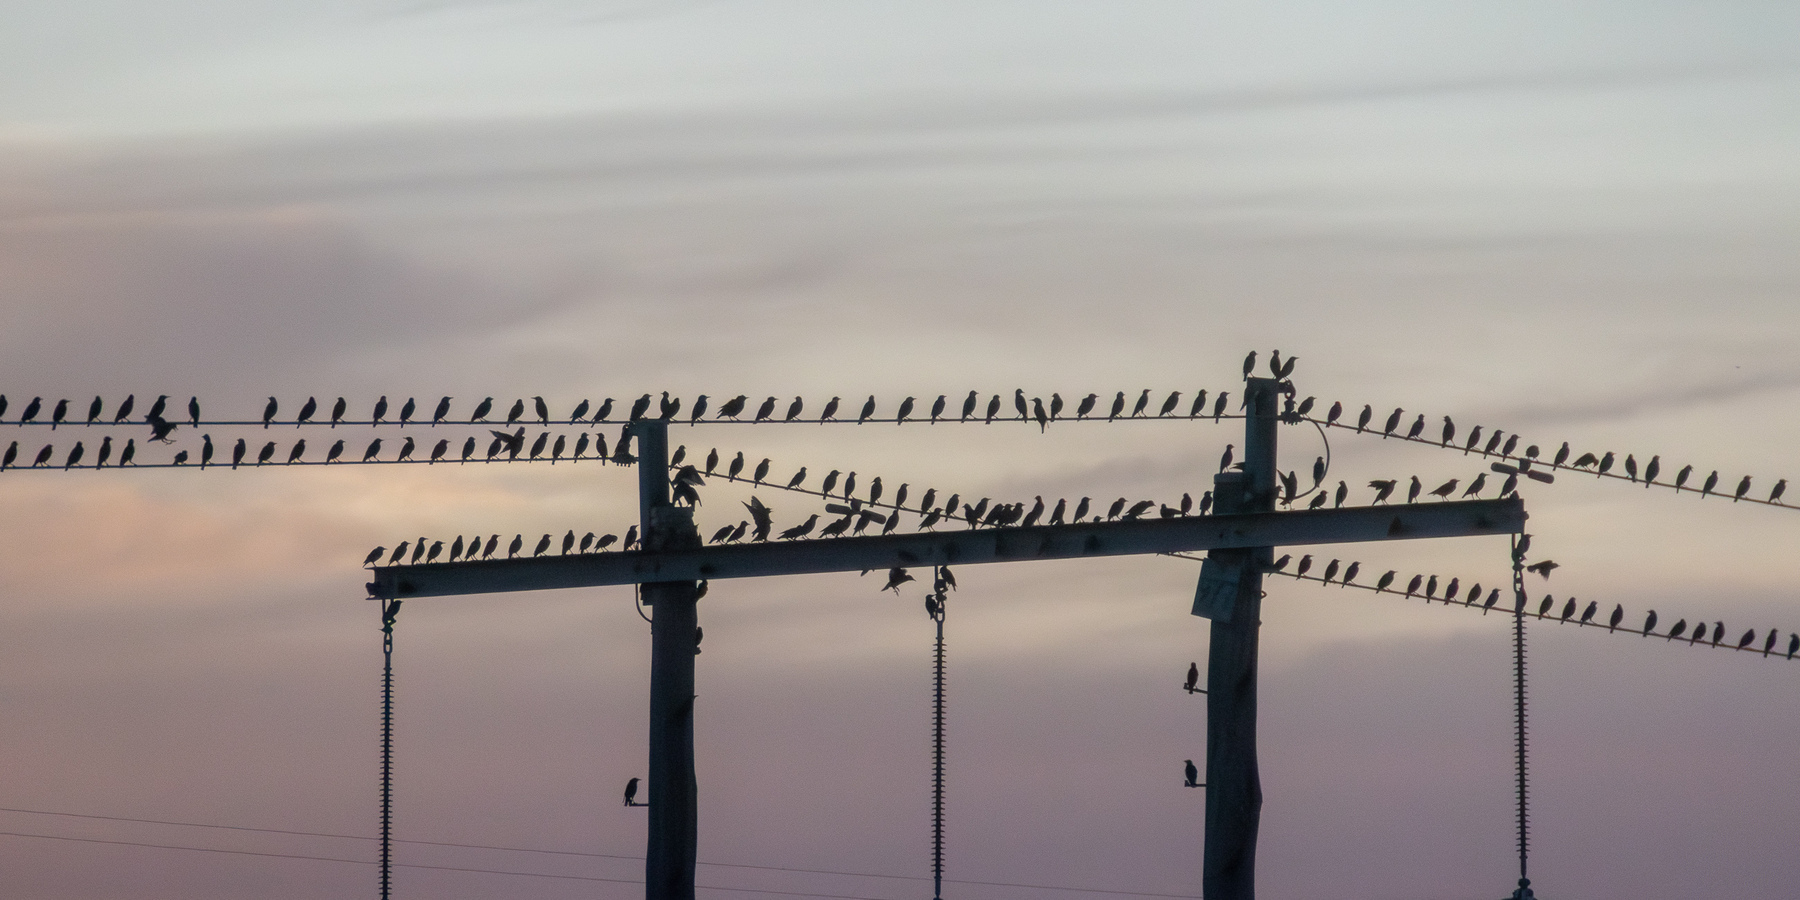 Silhouette of a flock of birds perched on a power line.